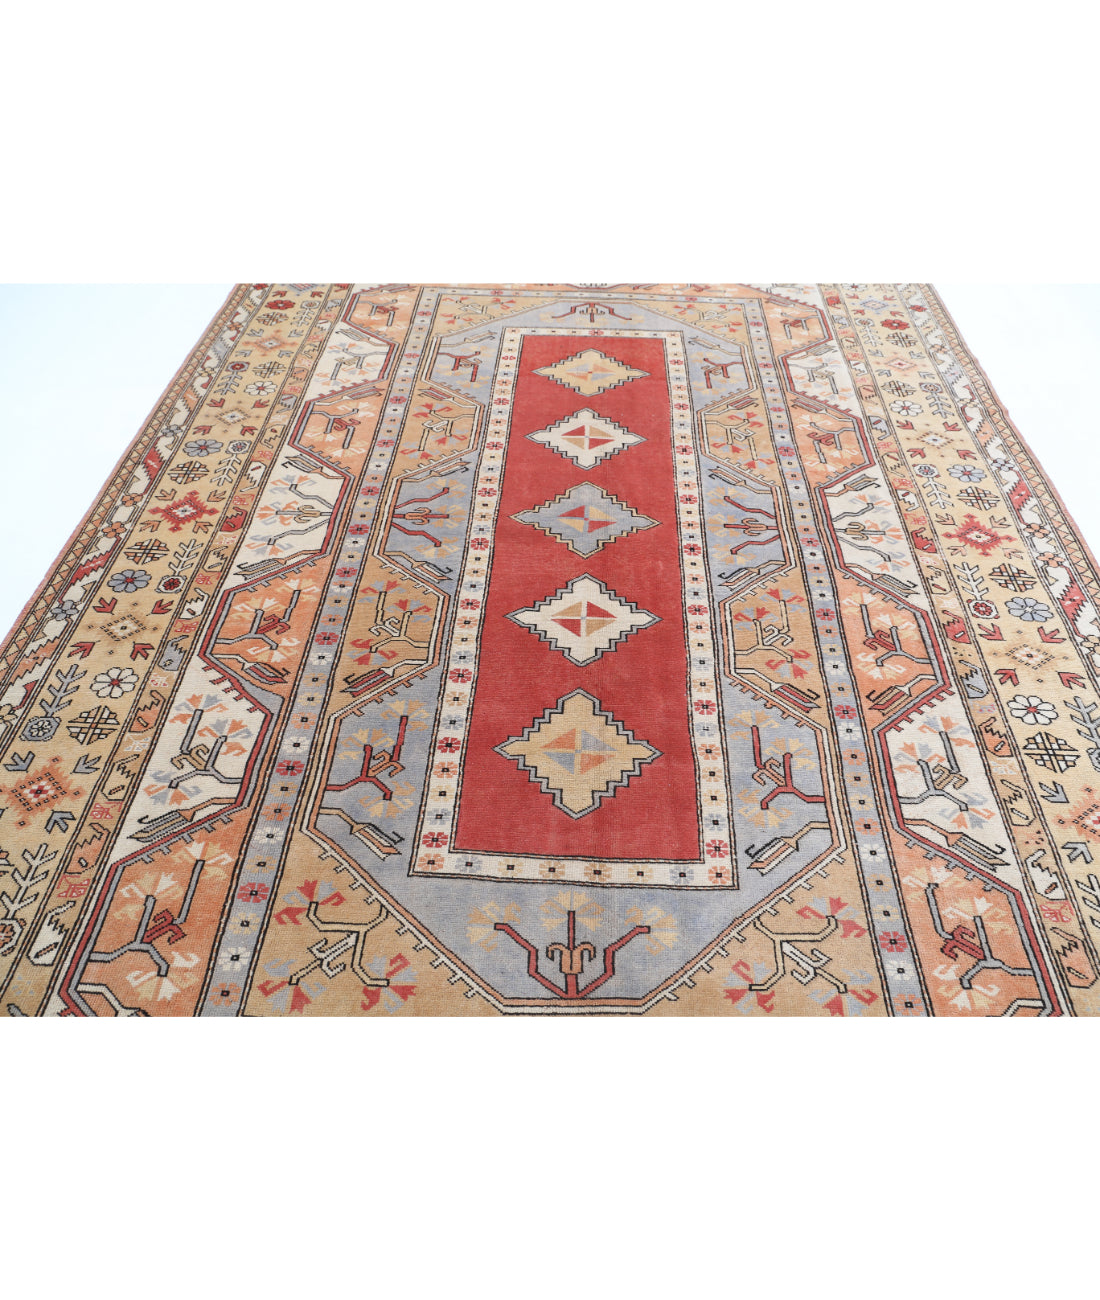 Hand Knotted Vintage Turkish Milas Wool Rug - 8'4'' x 12'4'' 8'4'' x 12'4'' (250 X 370) / Multi / Gold